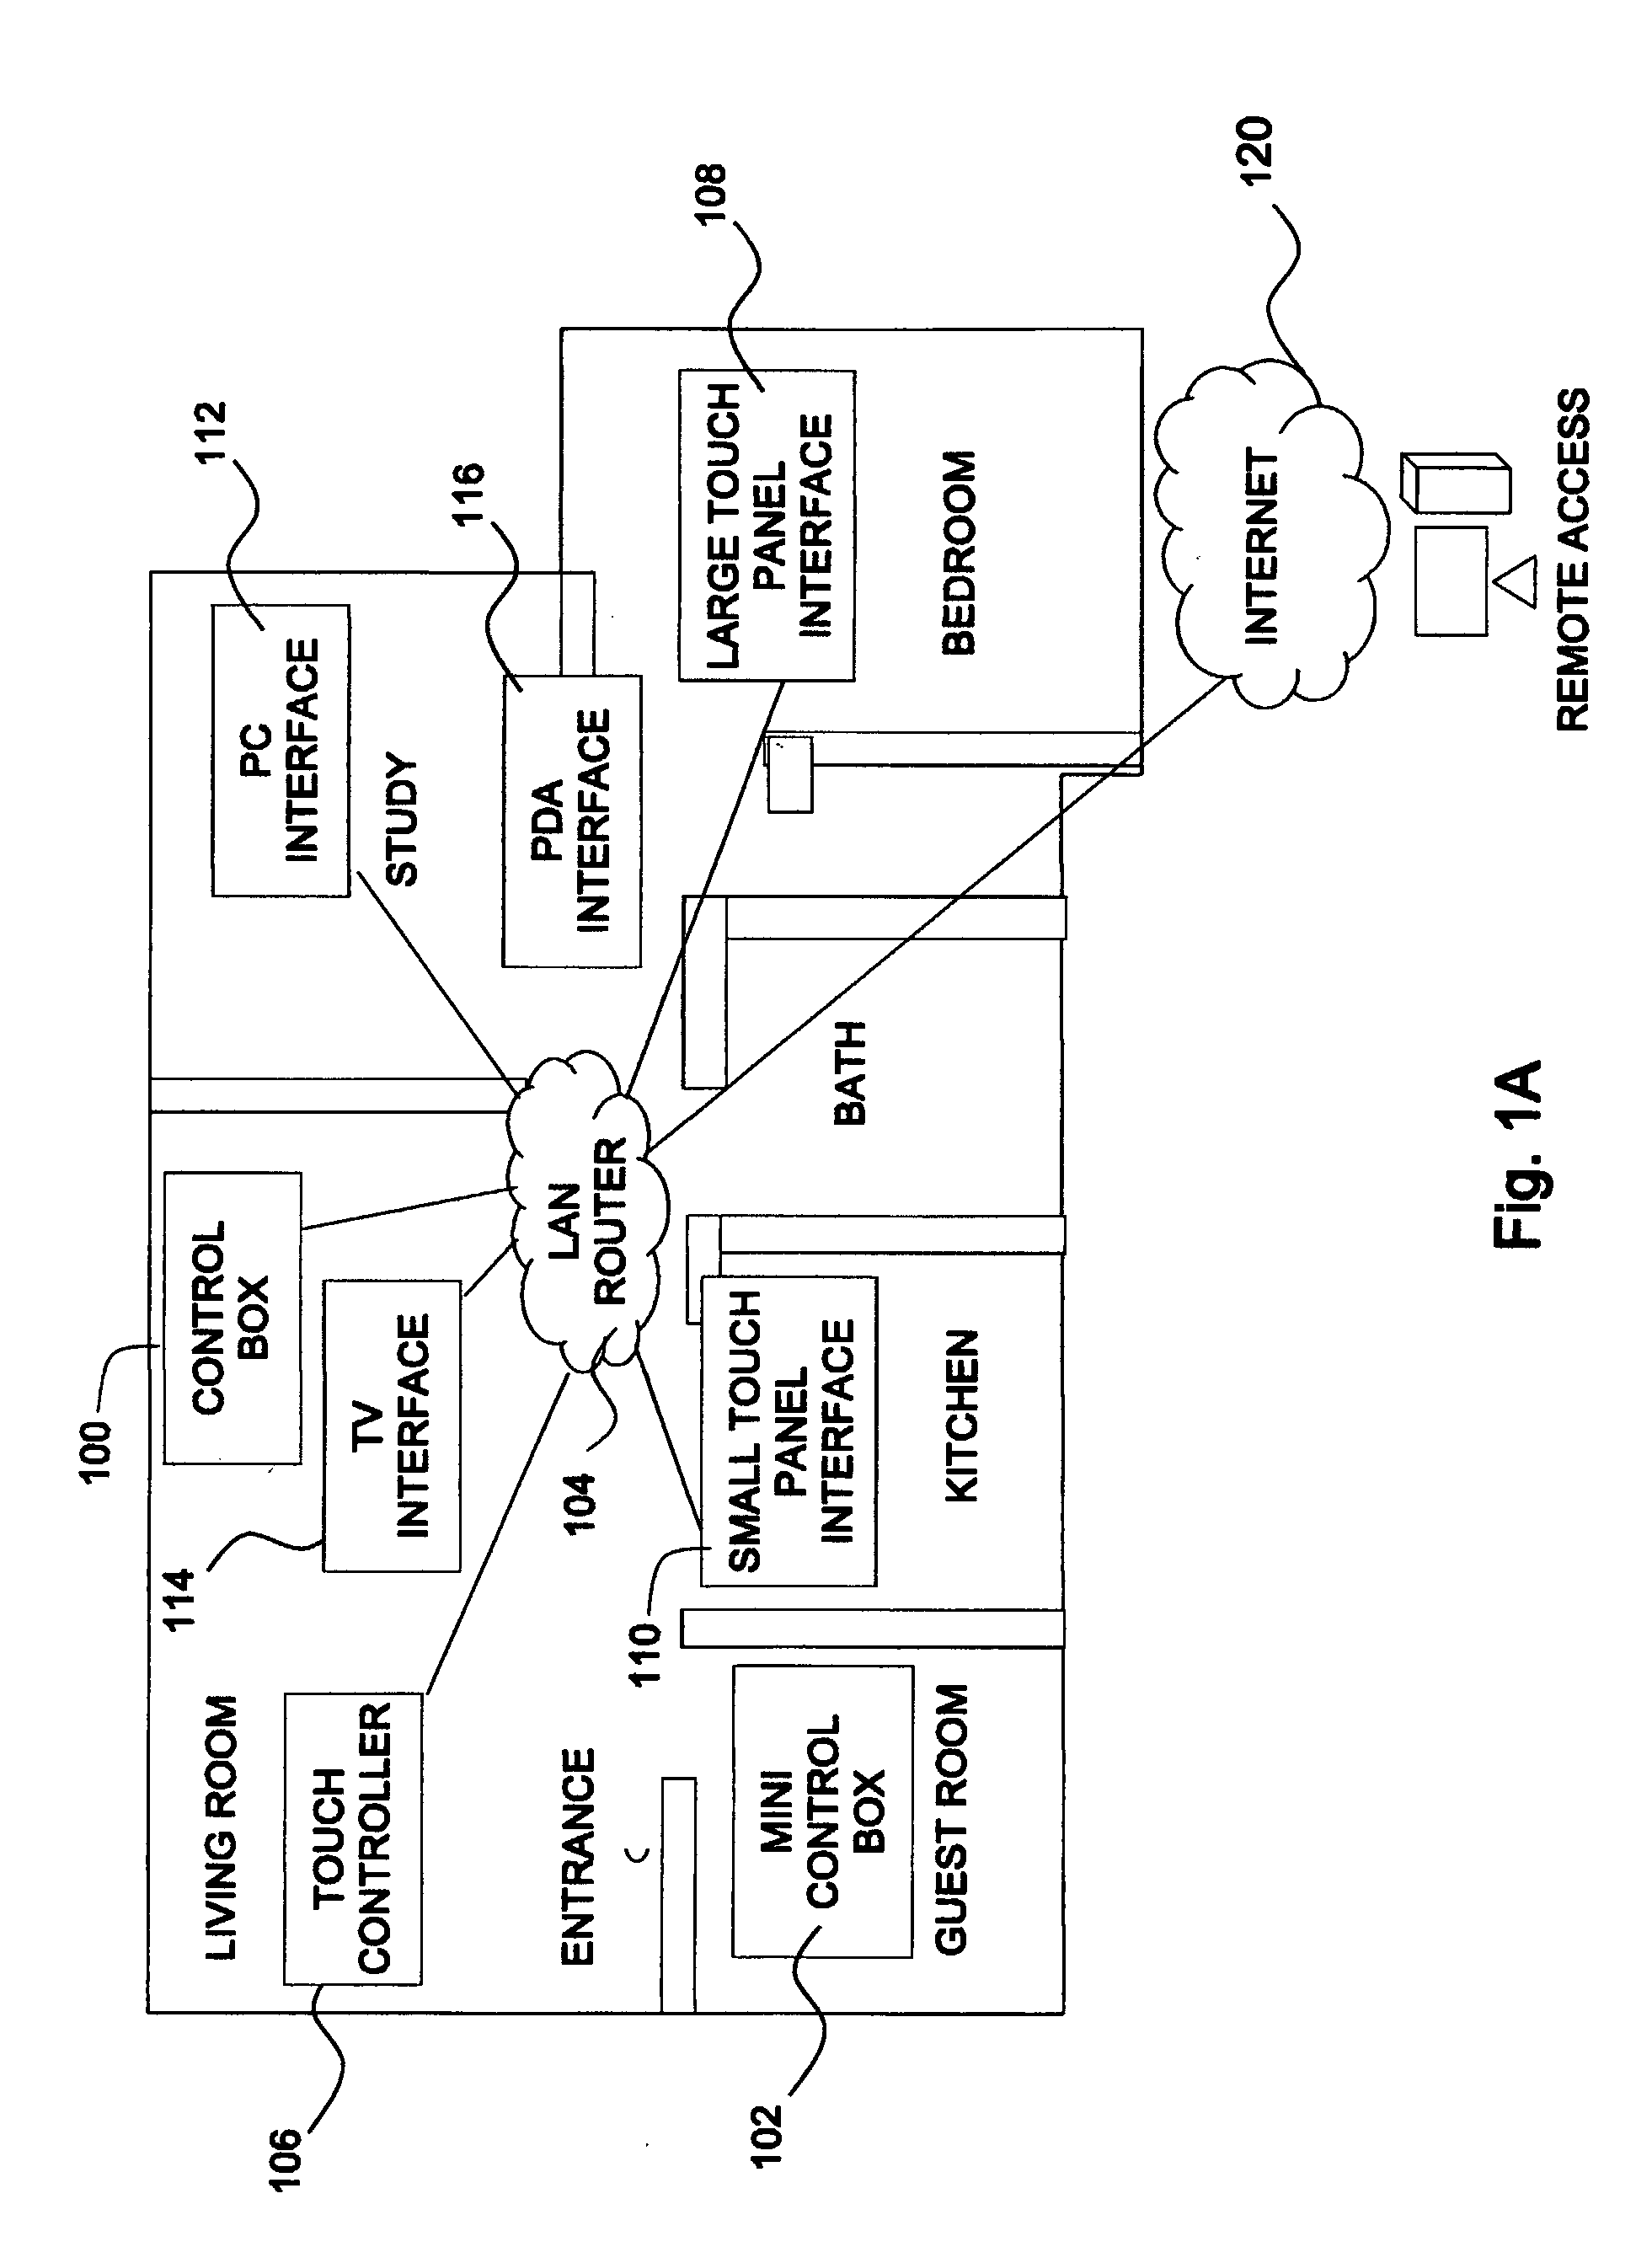 Networked Device Control Architecture